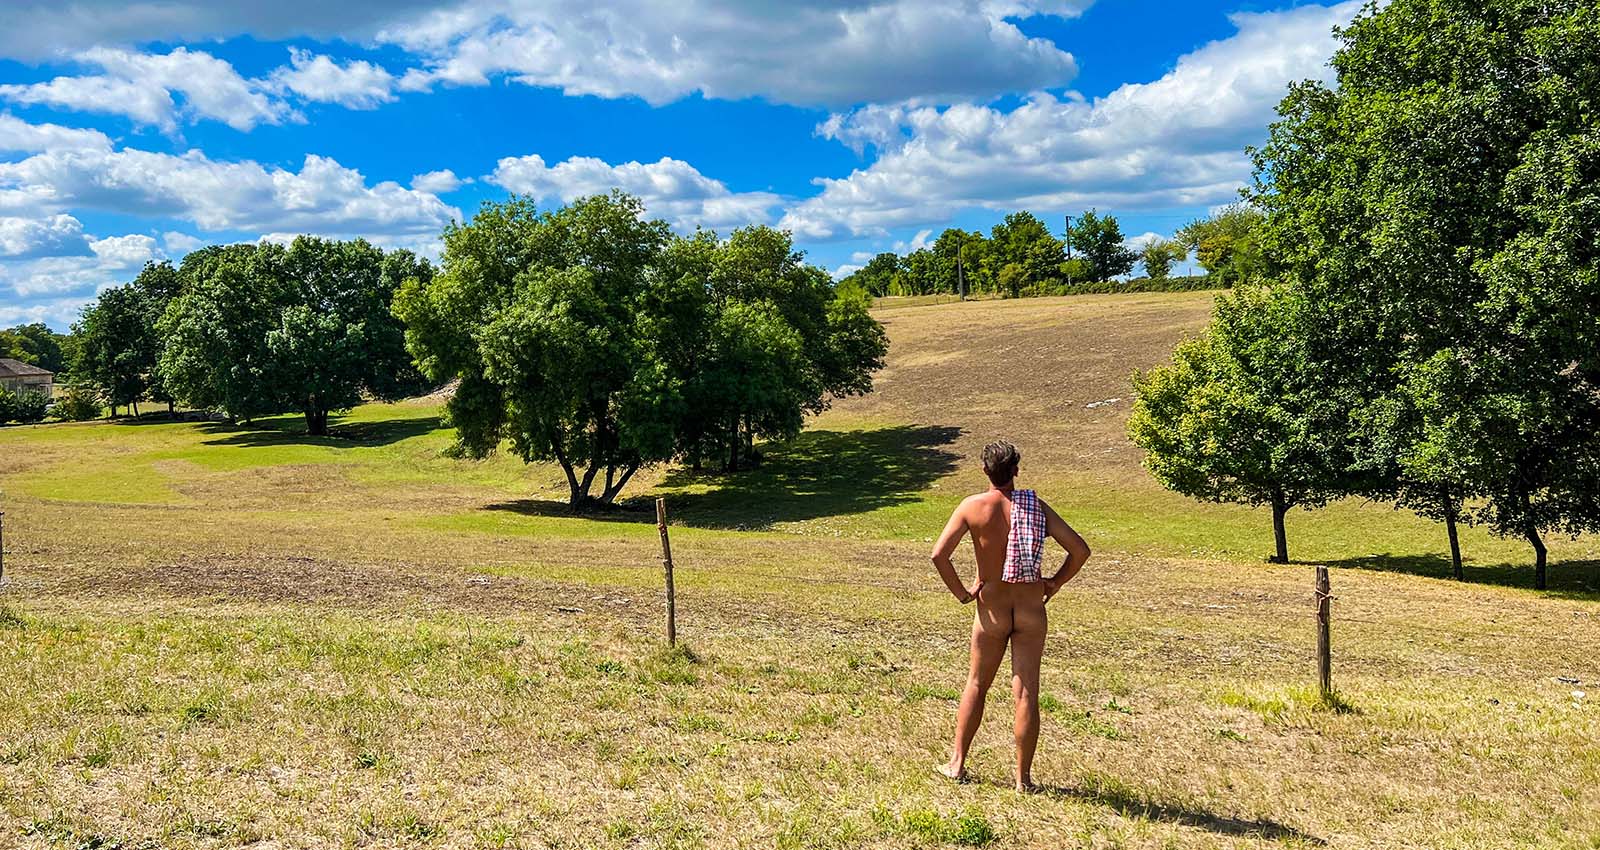 How to find a great naked hiking trail